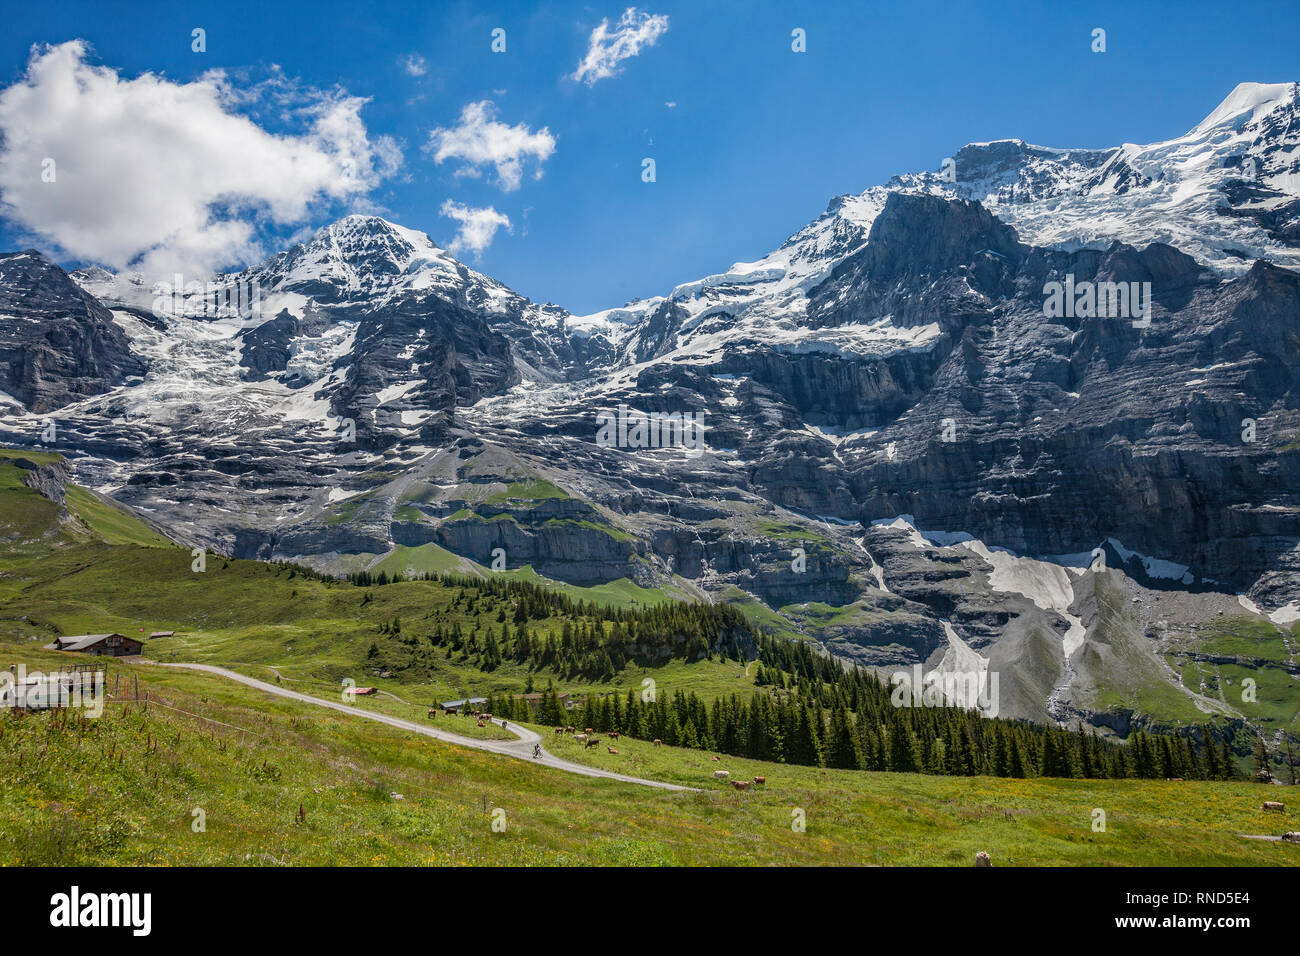 nice and ever young senior woman riding her e-mountainbike below the Eiger northface, Jungfrauregion, Switzerland Stock Photo